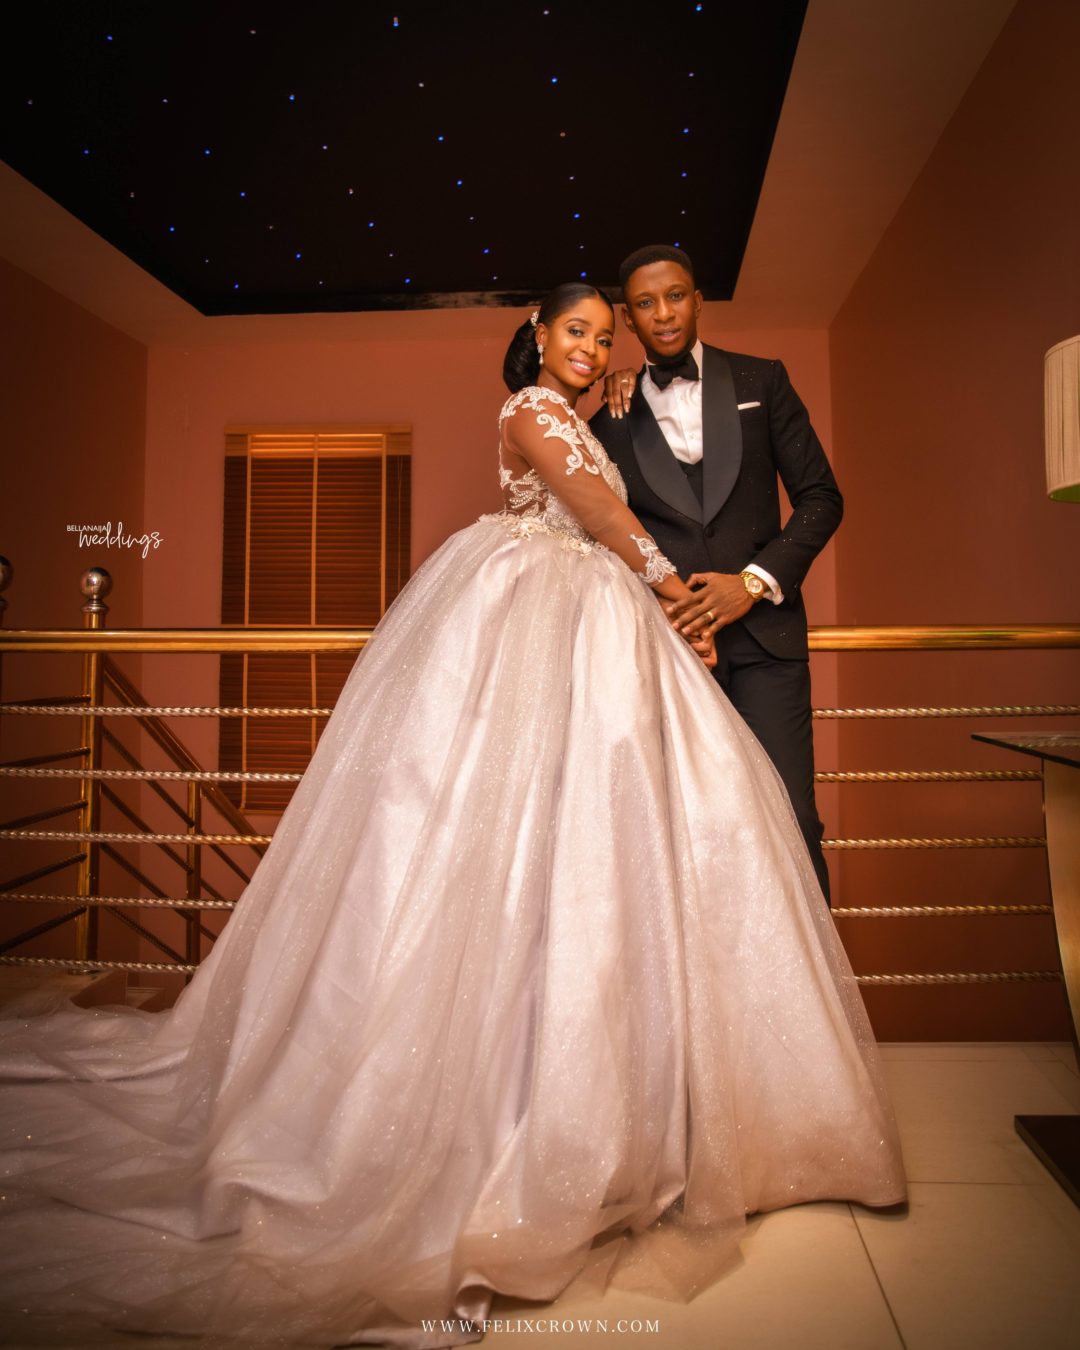 The #JustExperience19 Couple had us Smiling with their White Wedding